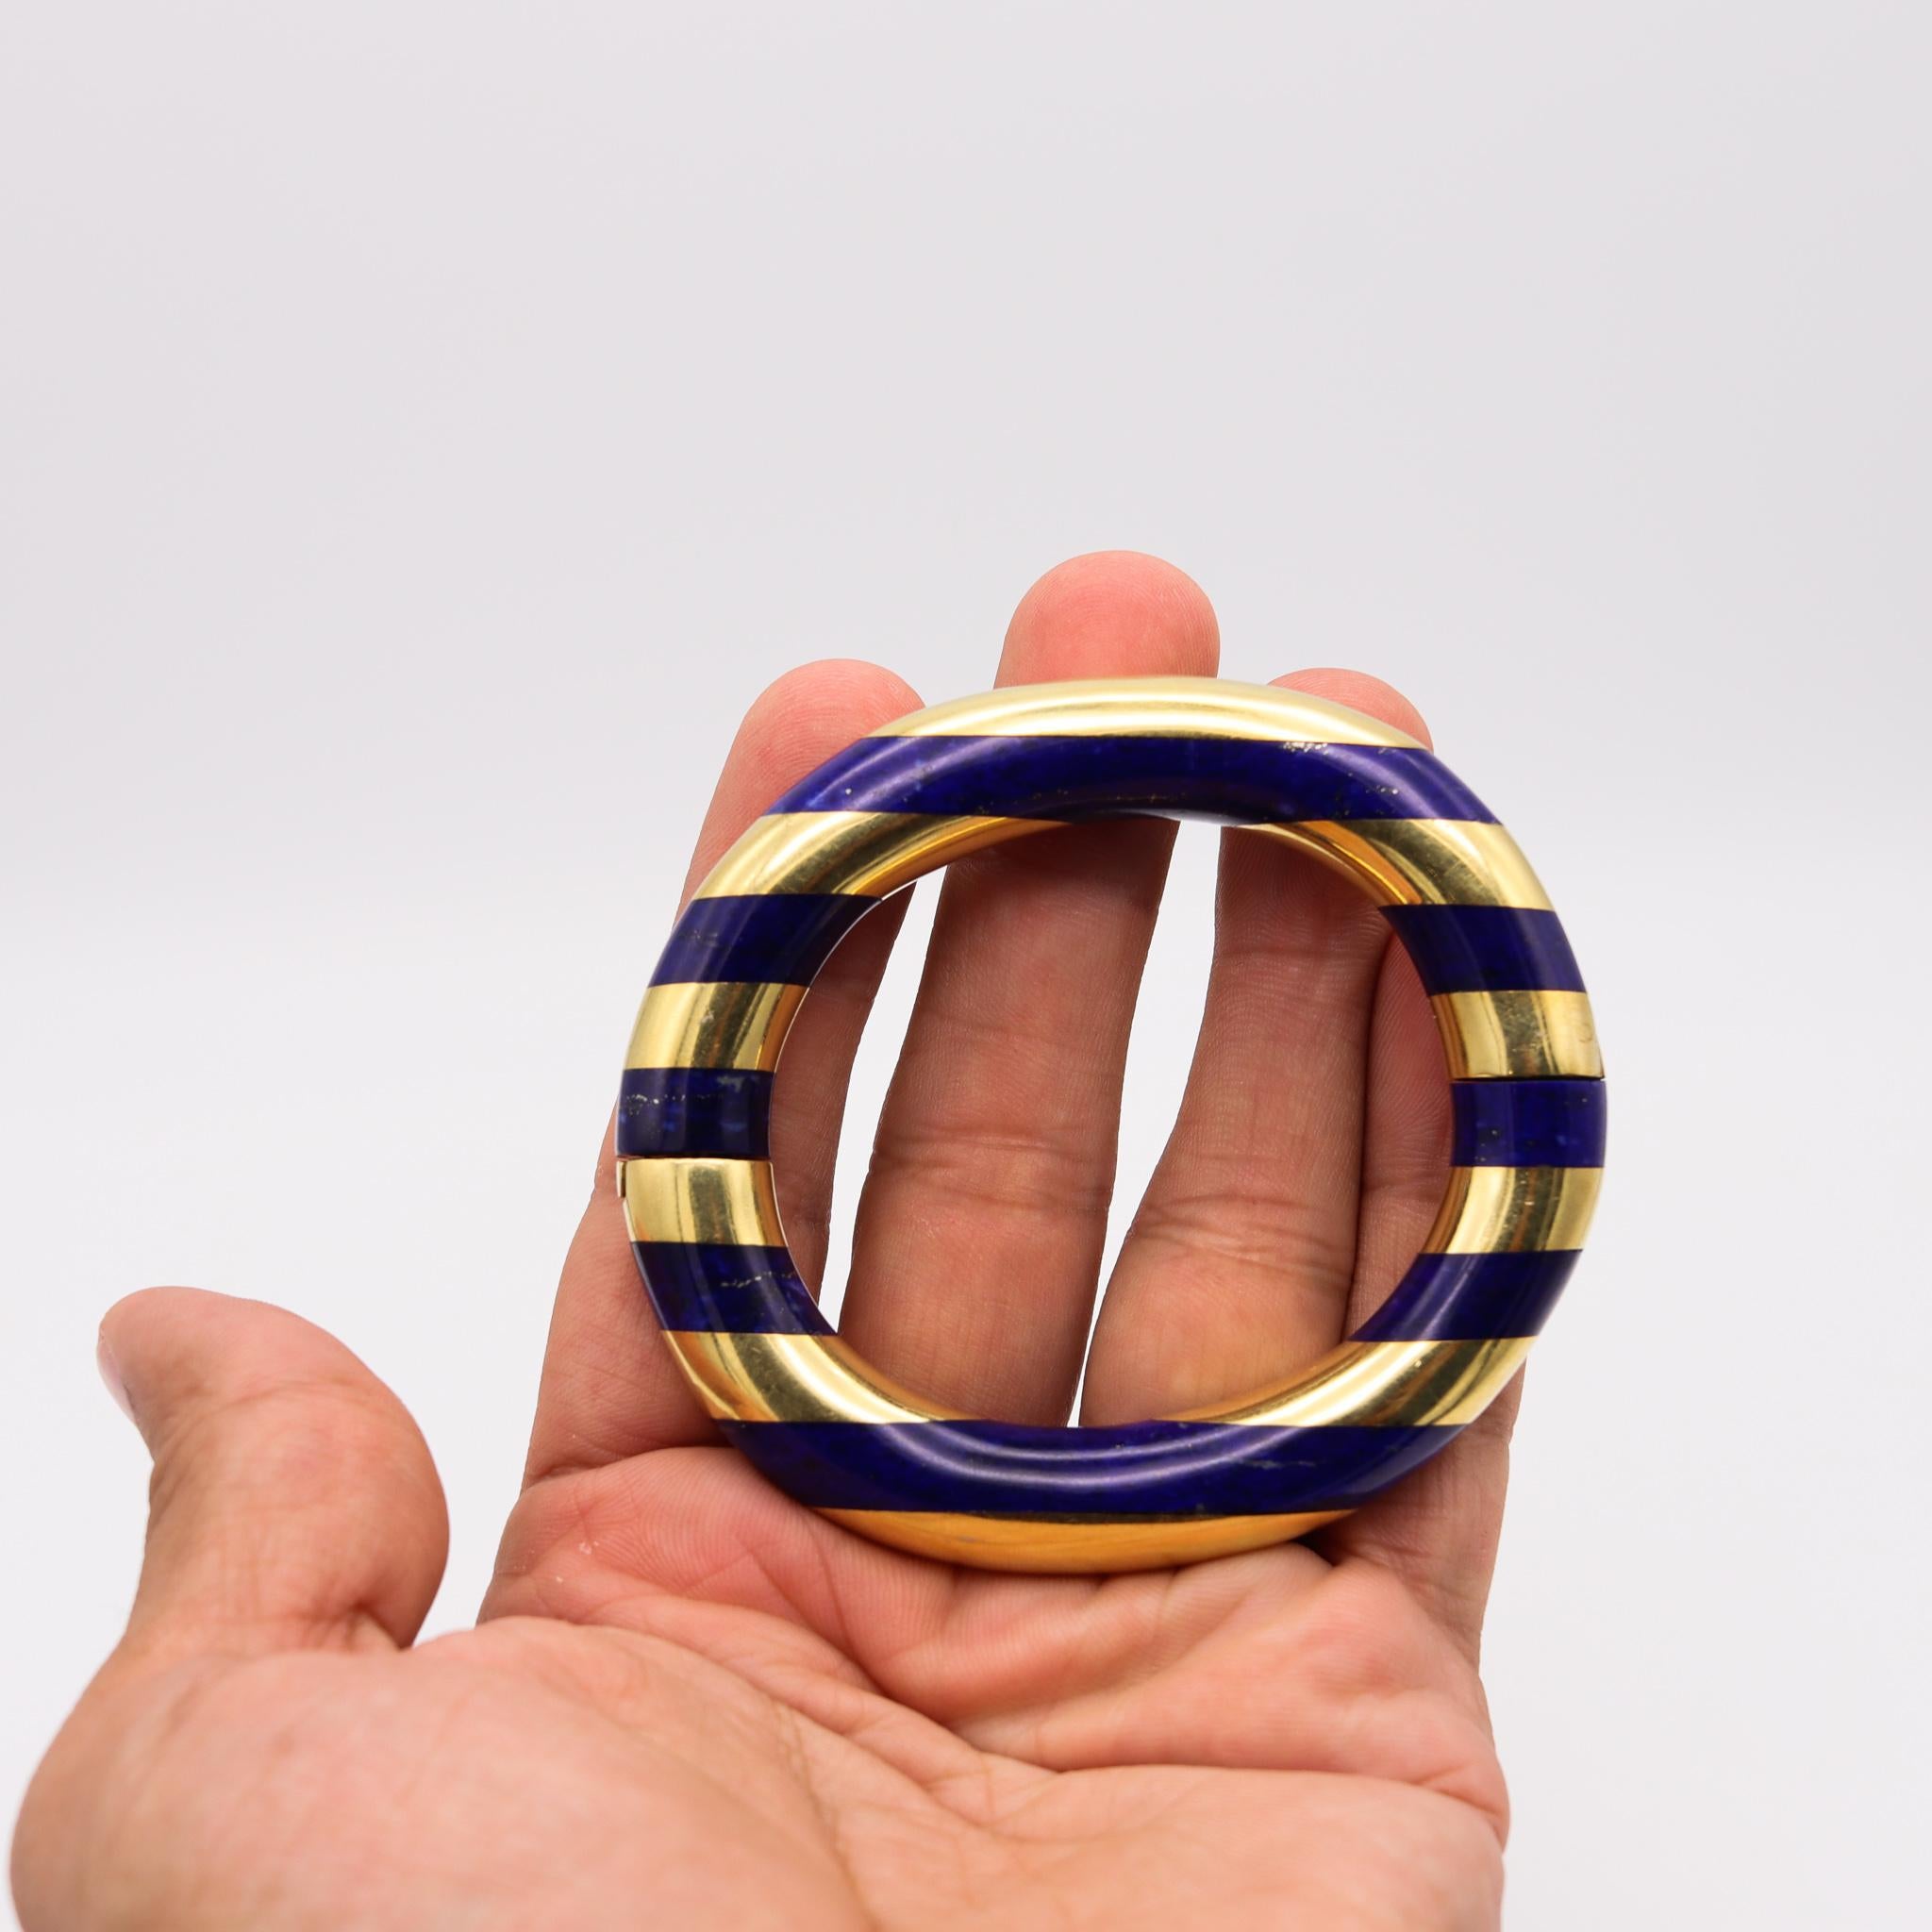 Tiffany & Co. 1977 Angela Cummings Geometric Bangle 18kt Gold and Lapis Lazuli In Excellent Condition For Sale In Miami, FL